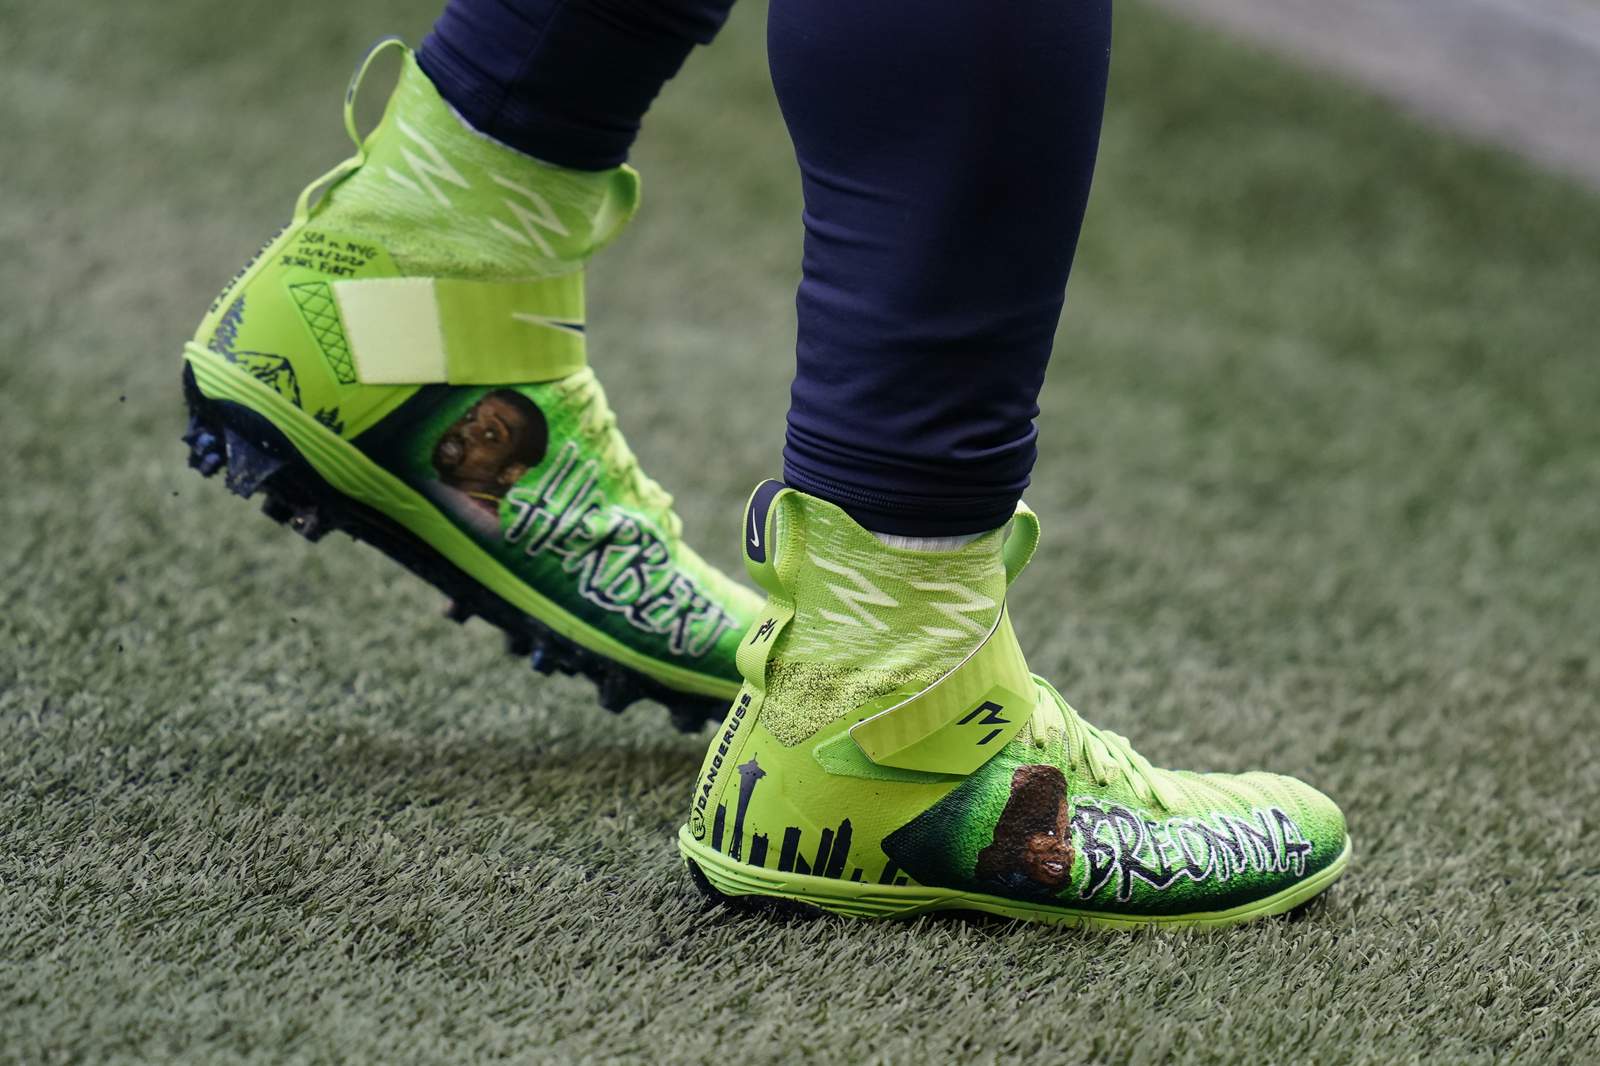 'My Cause My Cleats' campaign has taken a foothold in NFL